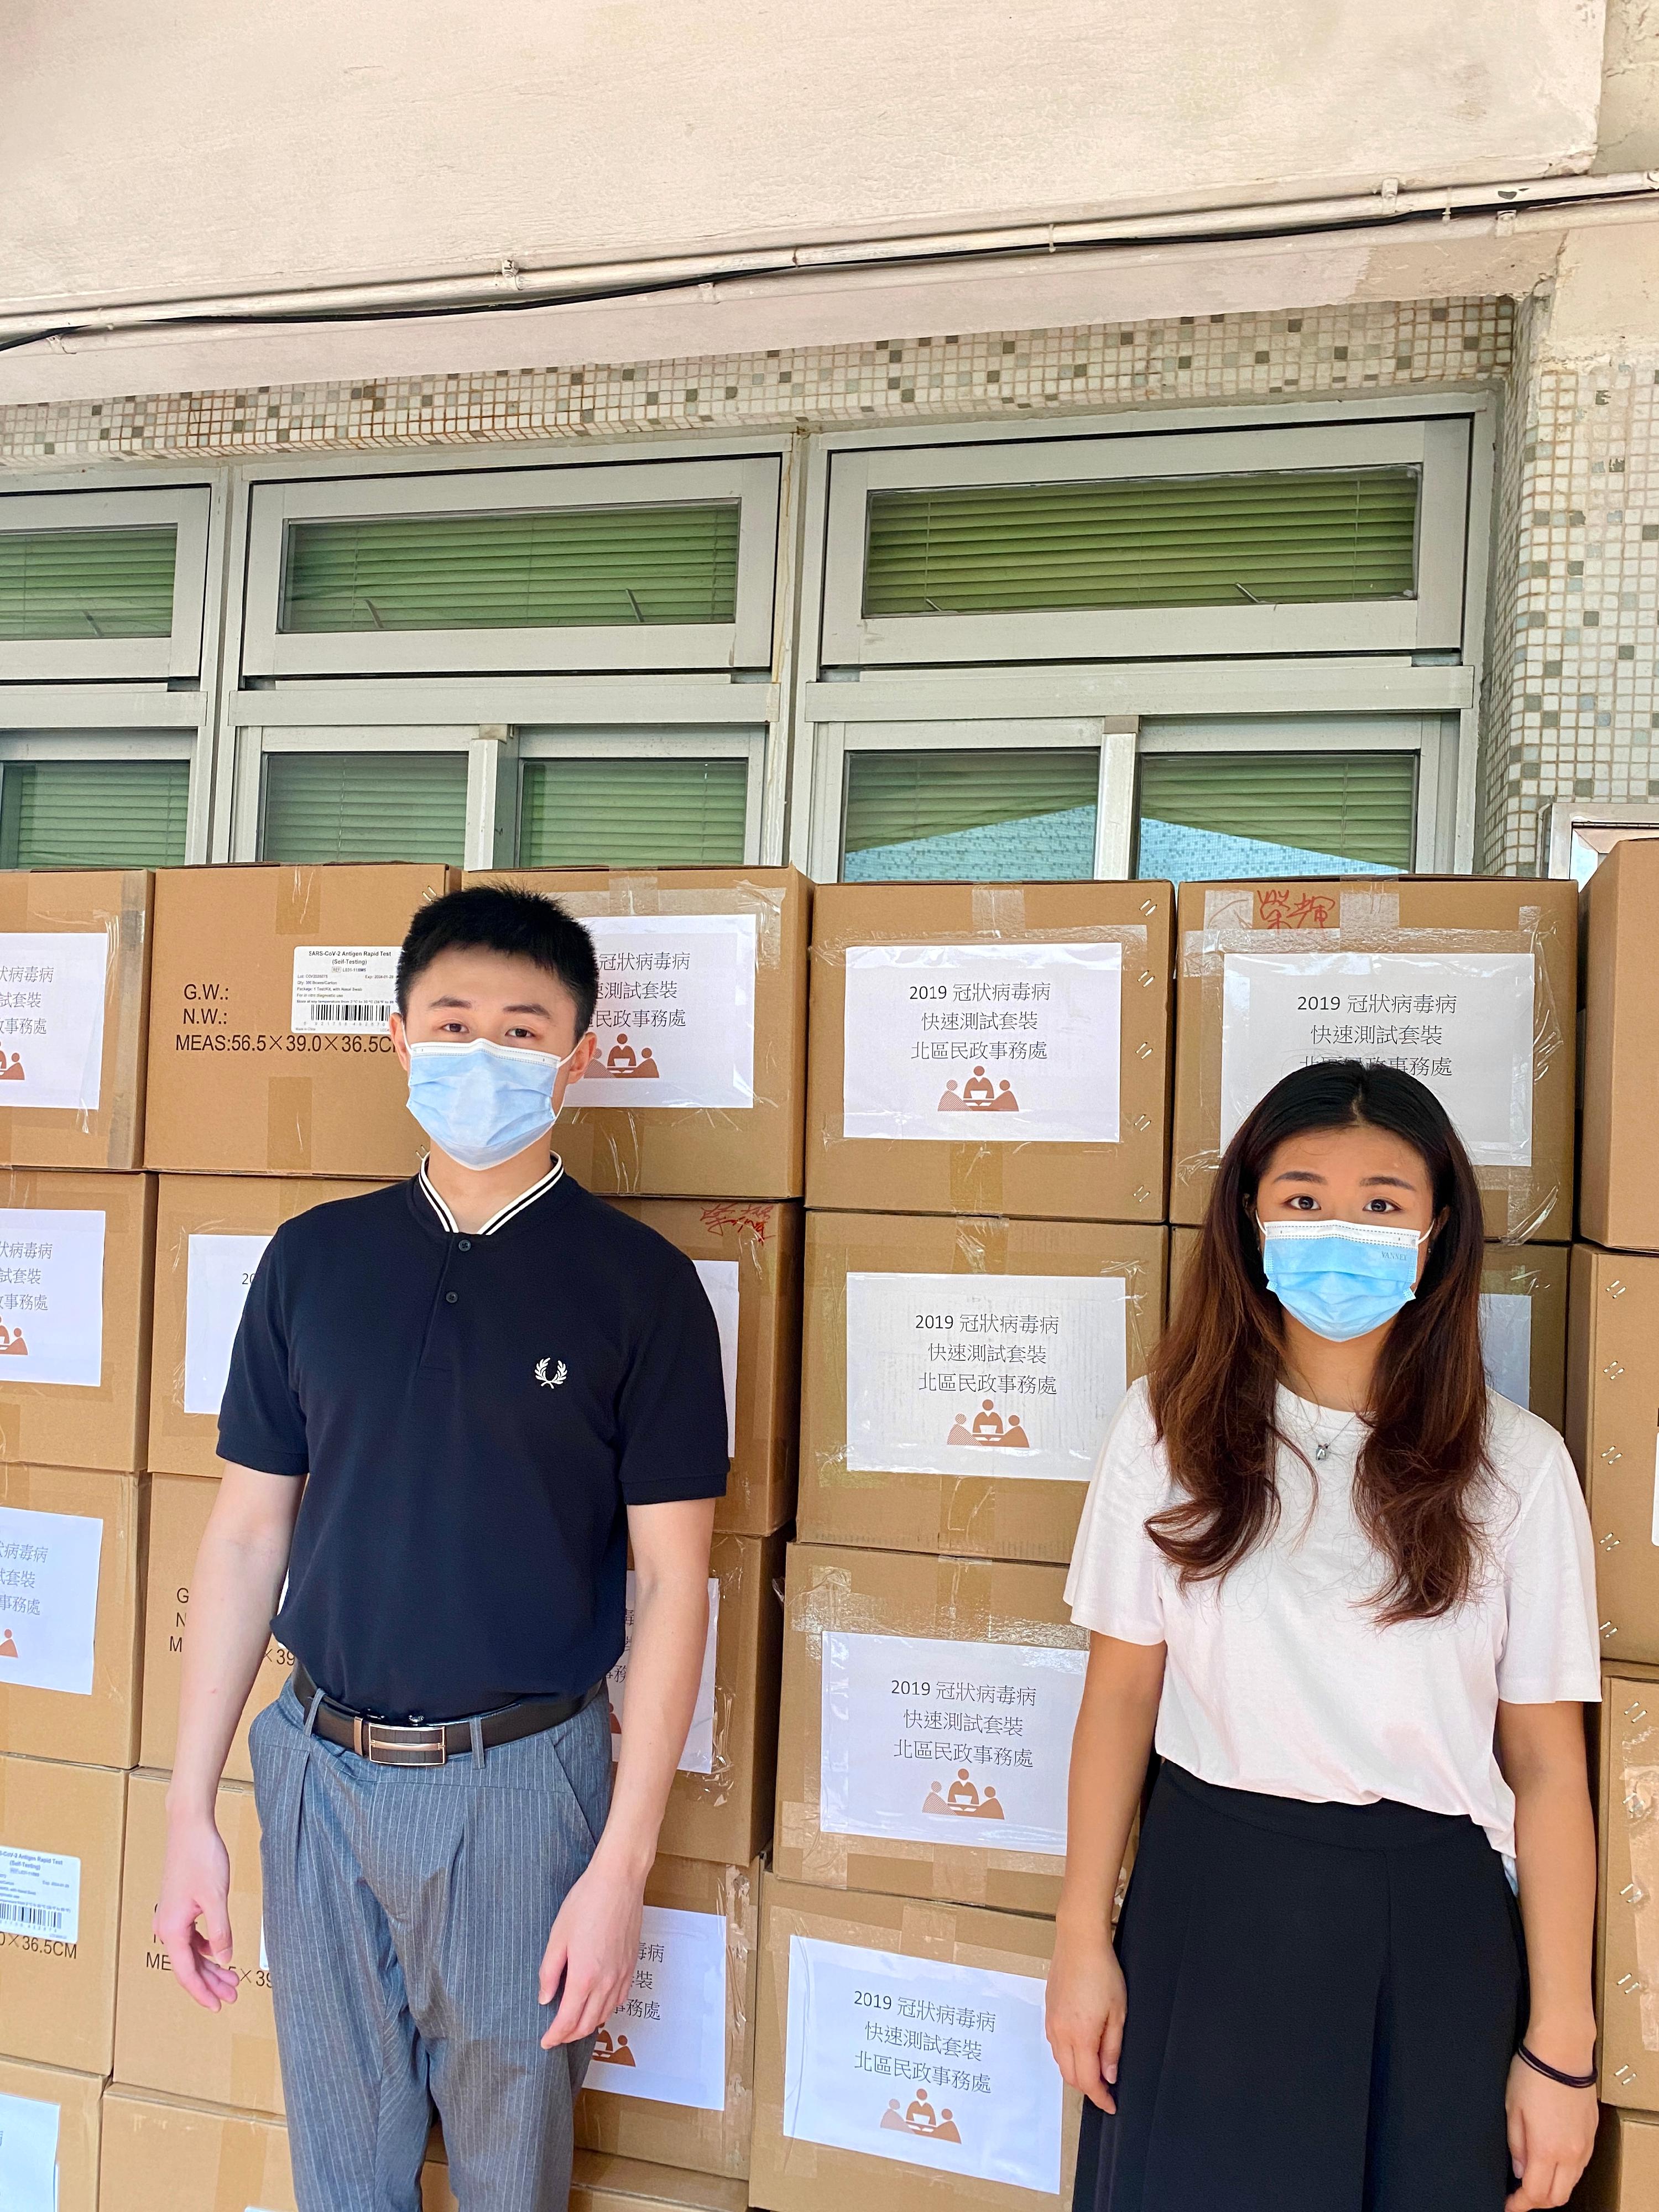 The North District Office today (June 24) distributed COVID-19 rapid test kits to households, cleansing workers and property management staff living and working in Wing Fai Centre for voluntary testing through the property management company.